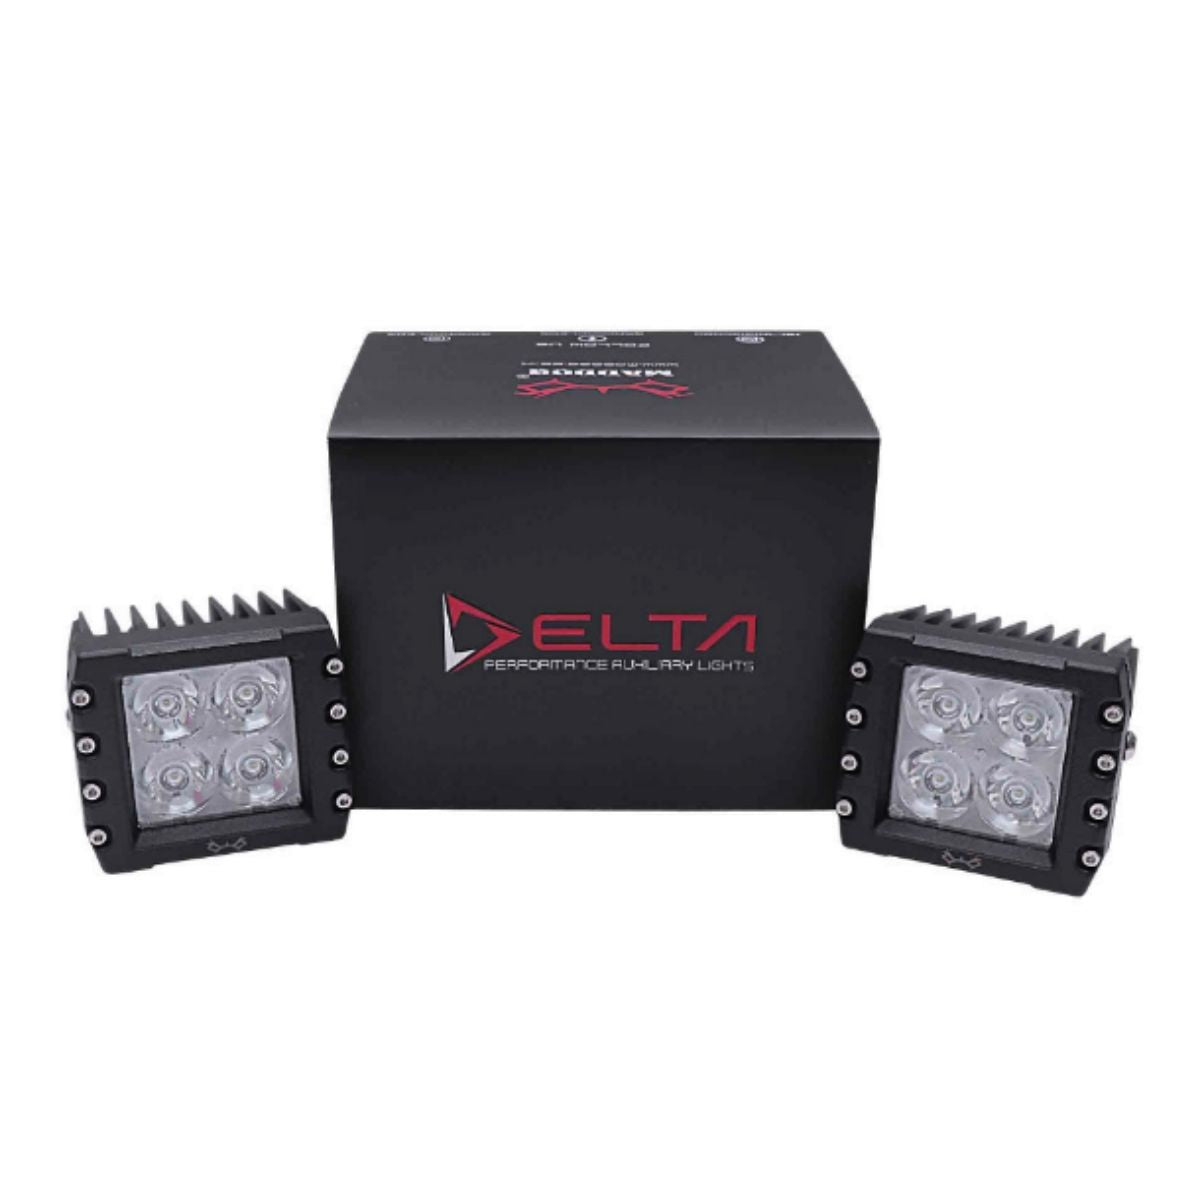 Delta Auxiliary Light for Motorcycles - 30 Watts - 1